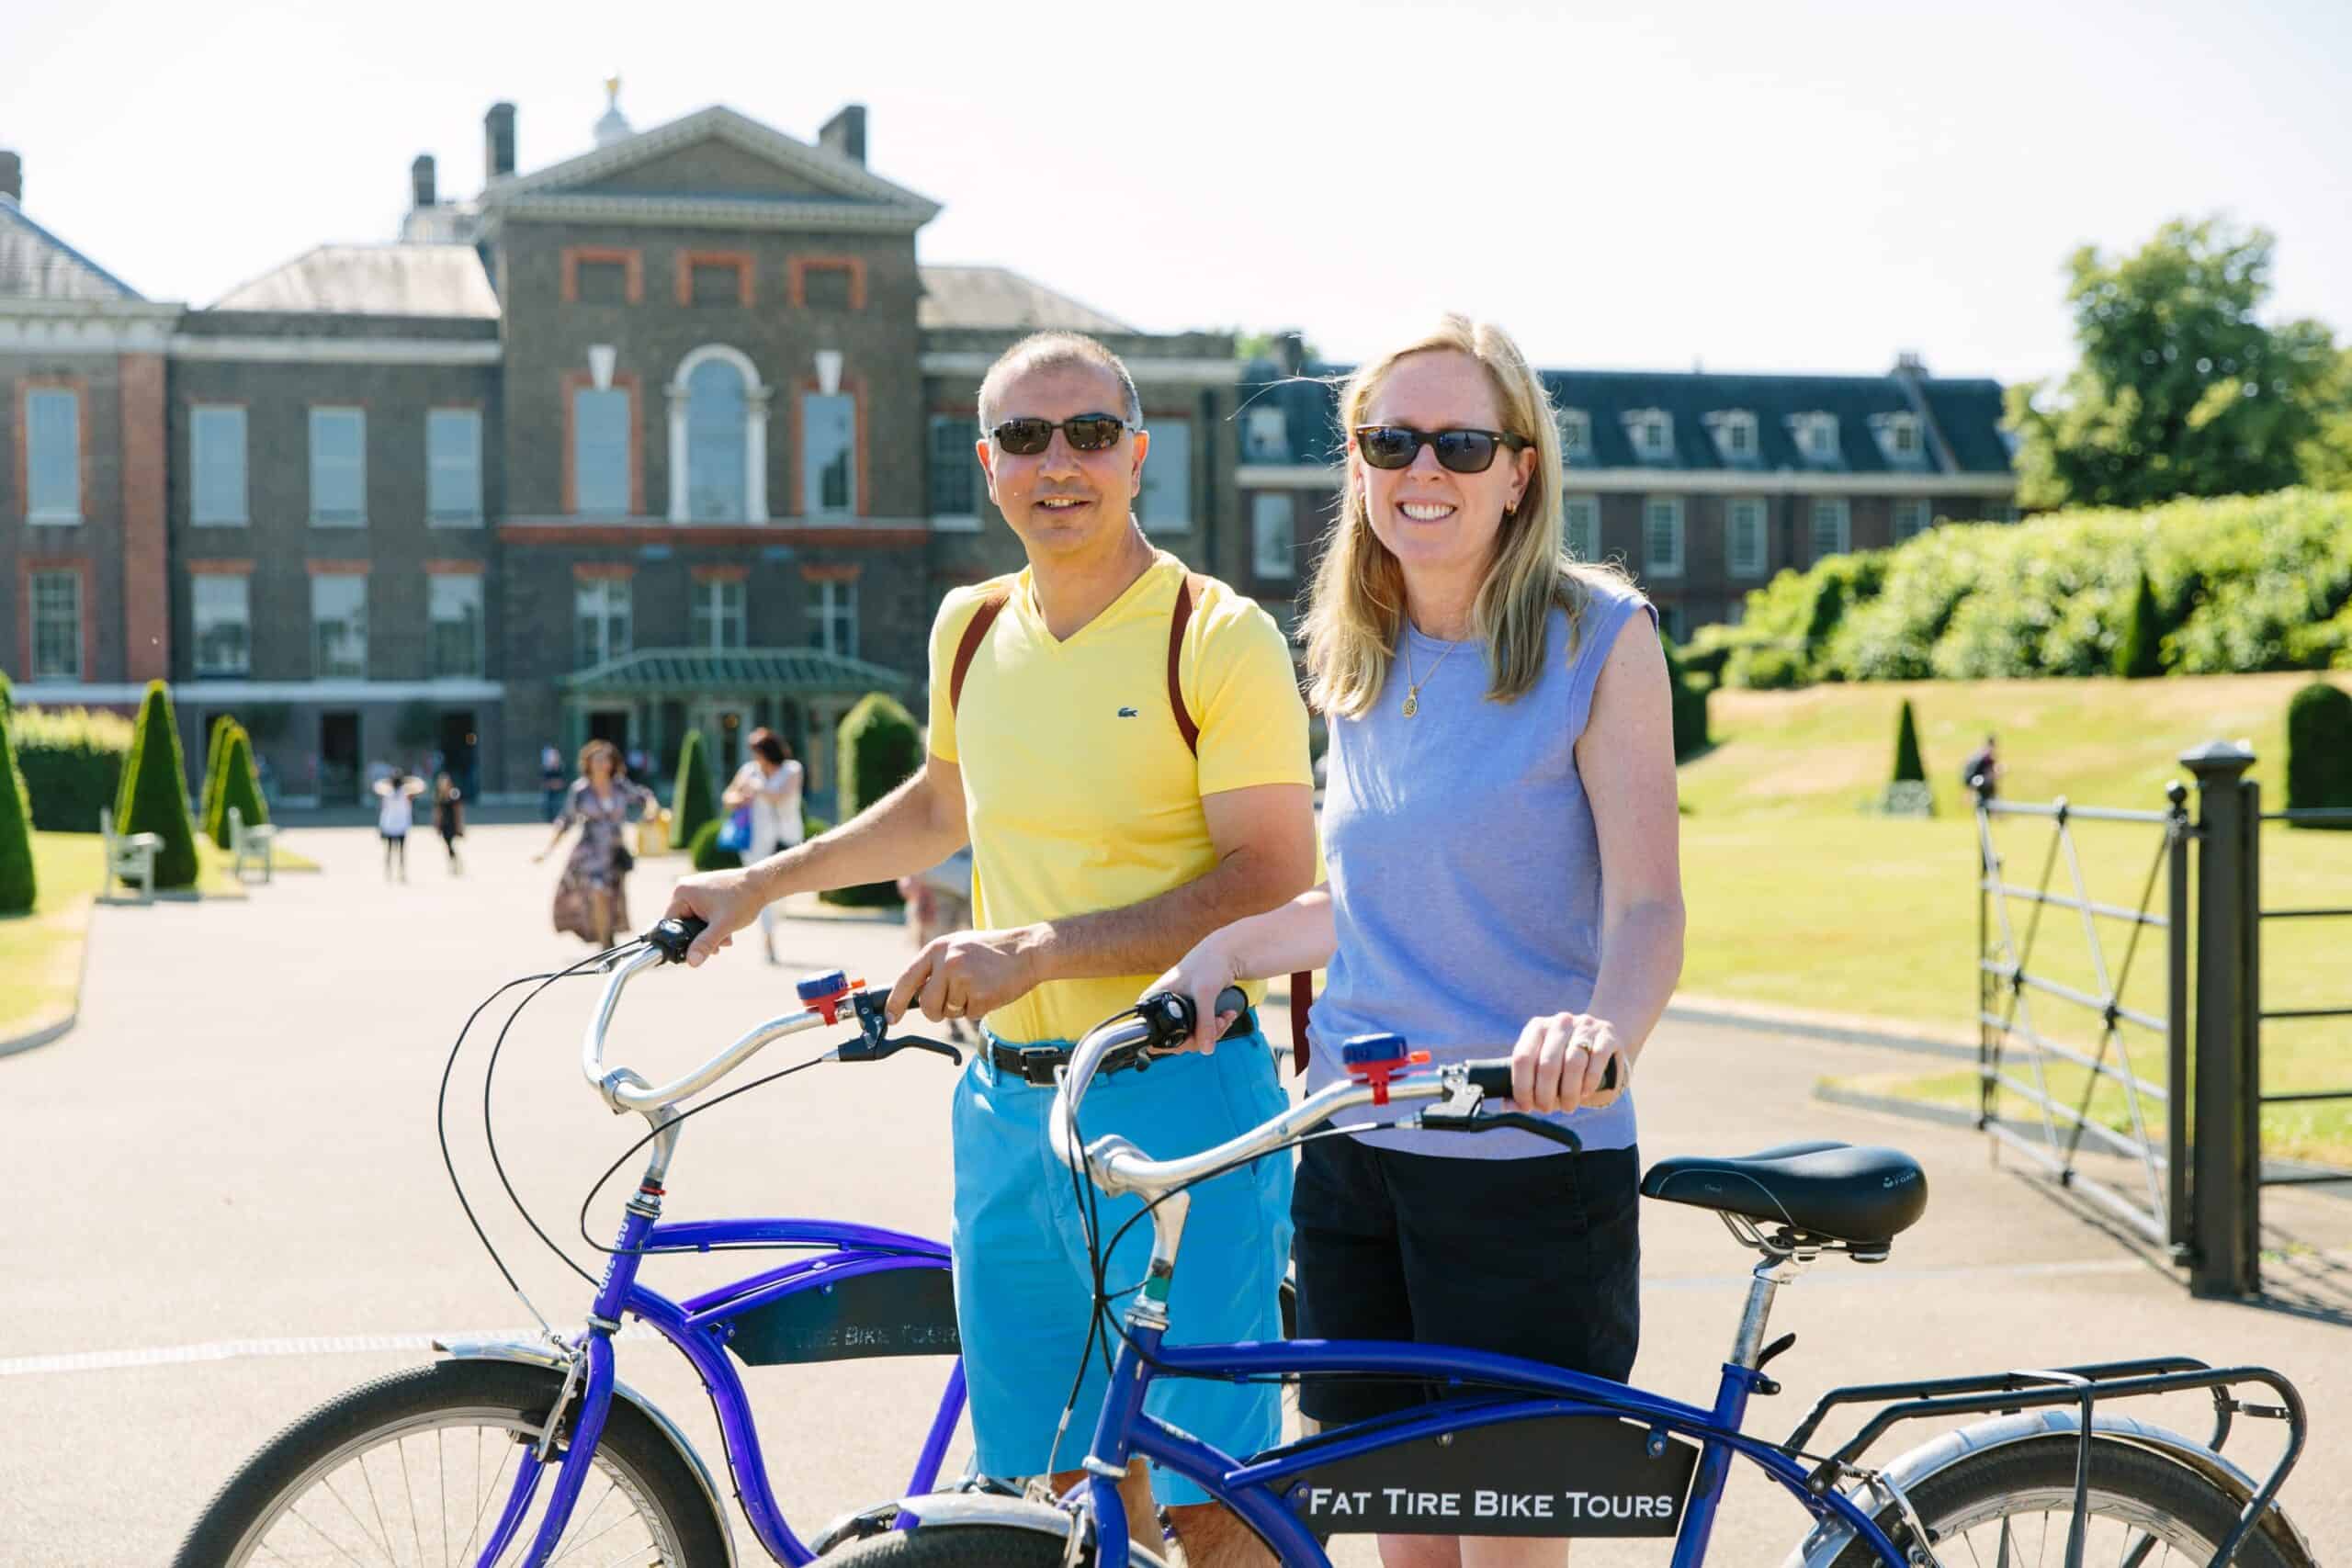 A couple poses with bikes in front of Kensington Palace in London, England